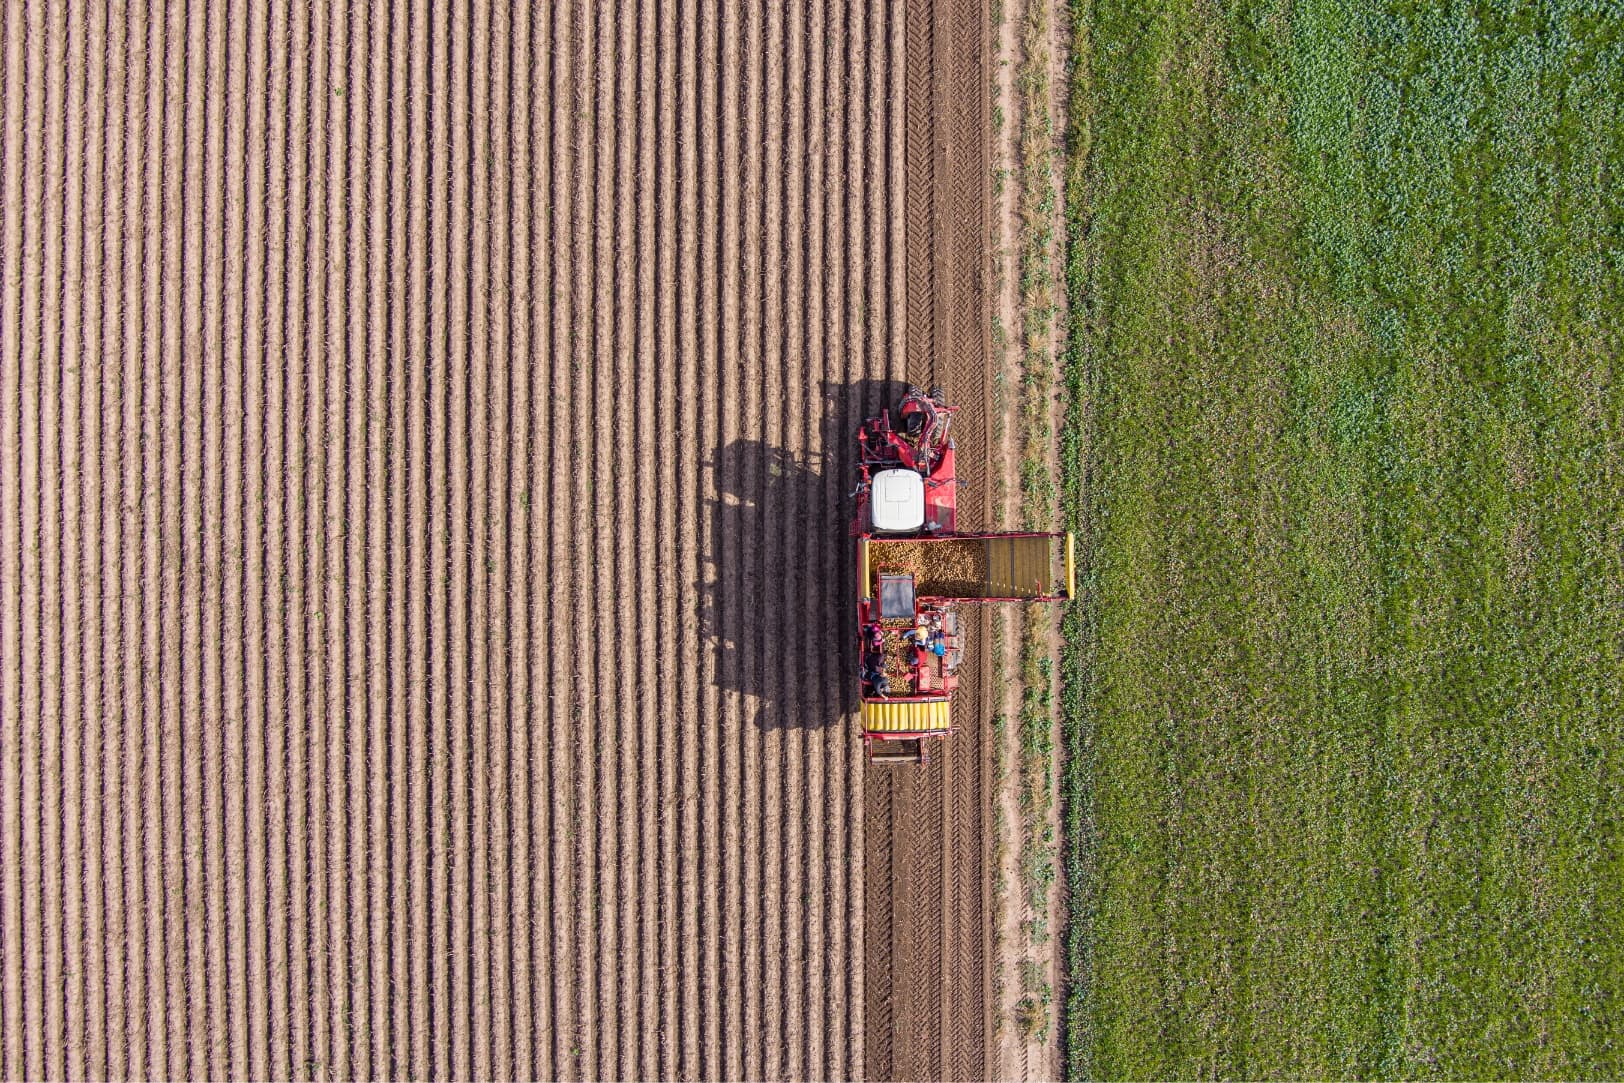 pic-agricultural-truck-harvesting-potatoes-1624x1083